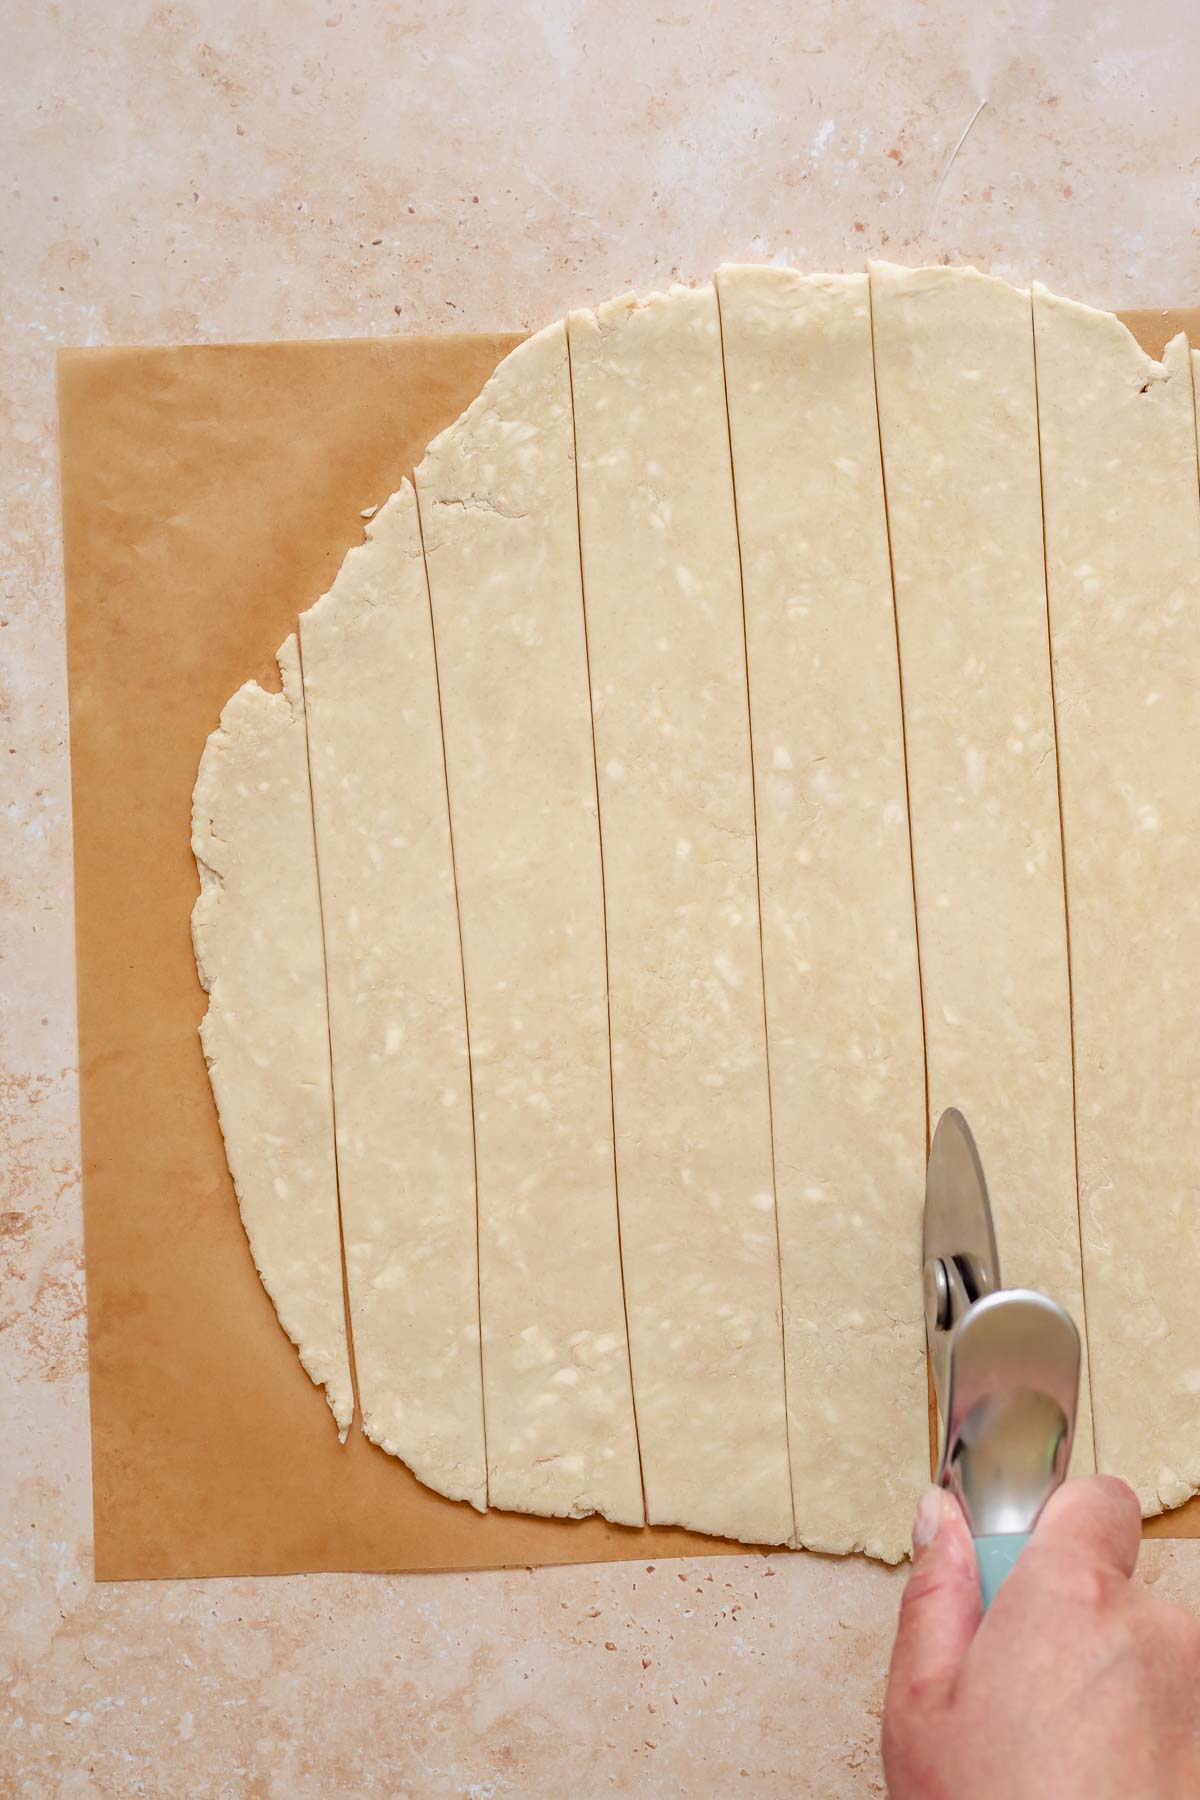 A pizza roller cuts rolled out pie crust into lattice strips.